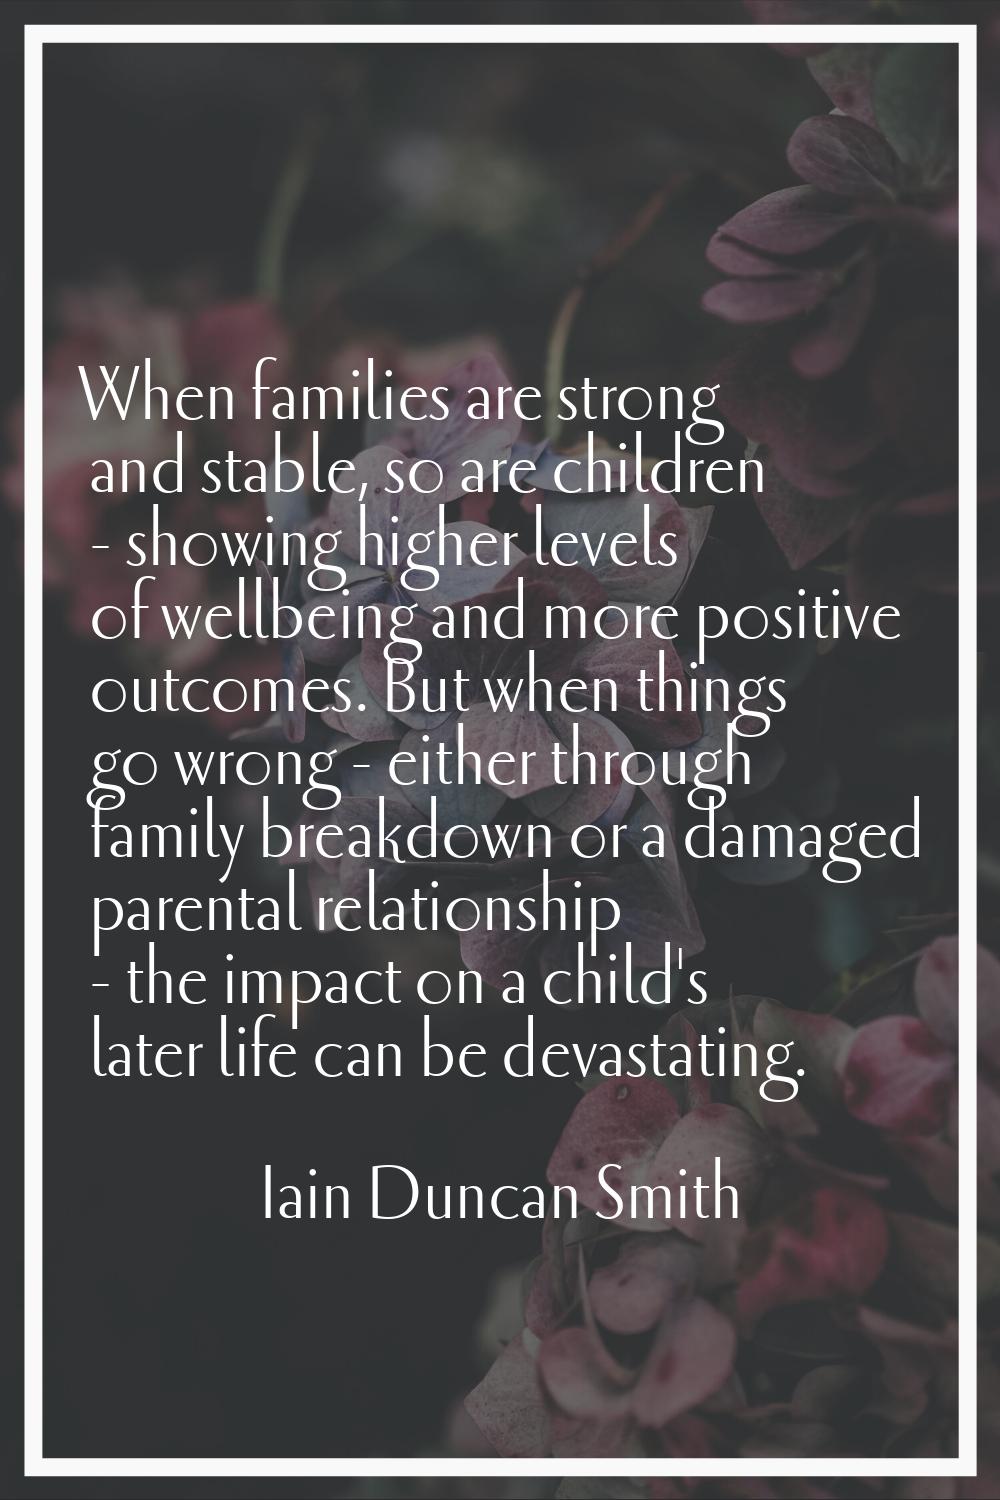 When families are strong and stable, so are children - showing higher levels of wellbeing and more 